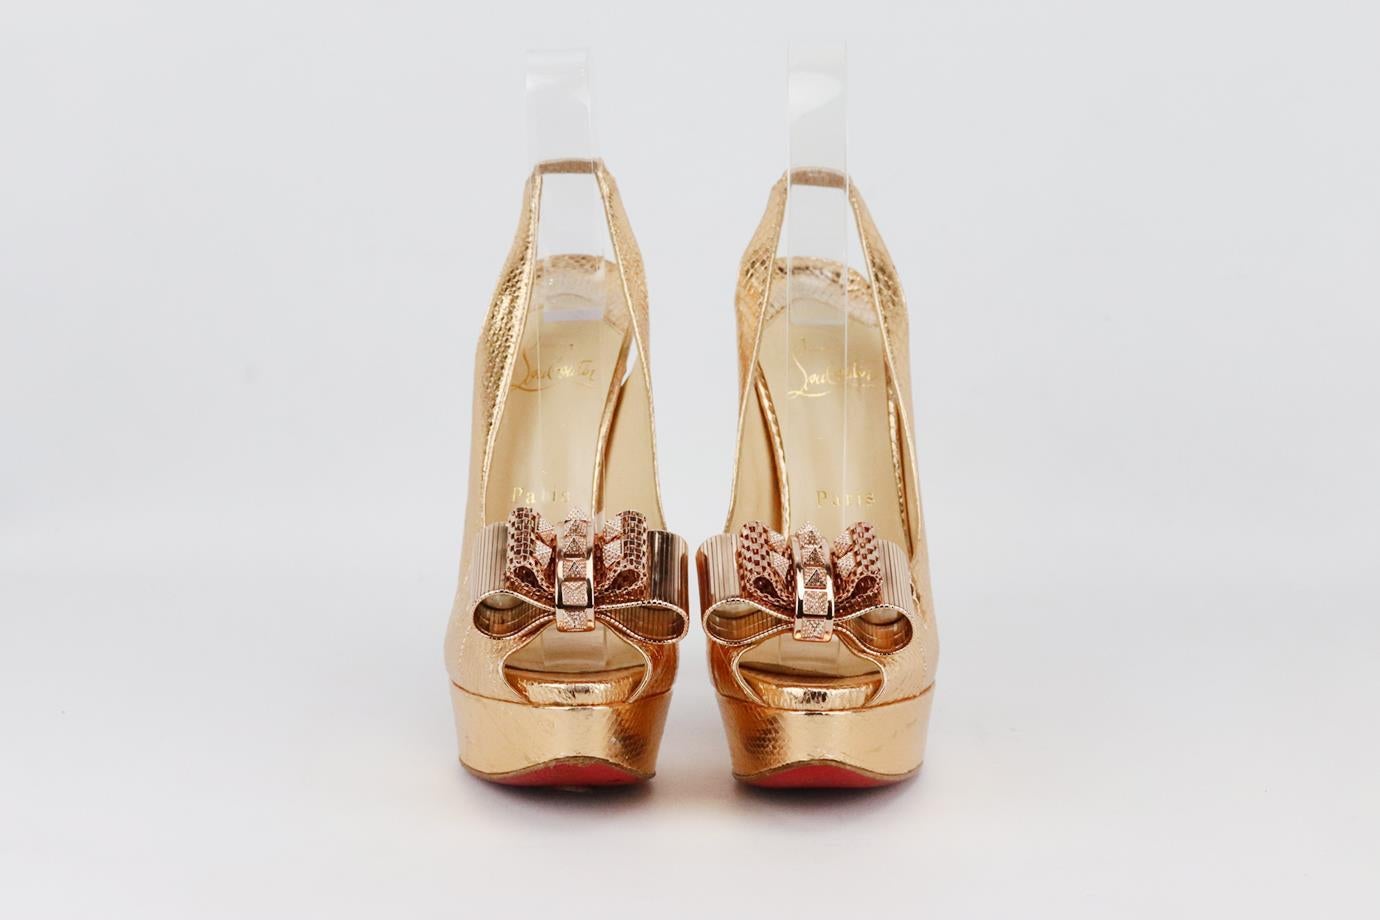 Christian Louboutin Metallic Lady Clou spiked snake effect slingback platform sandals. Made from rose-gold snake-effect leather with spiked bow and slingback sillhouette. Rose-gold. Slips on. Comes with box and dustbag. Size: EU 38 (UK 5, US 8).